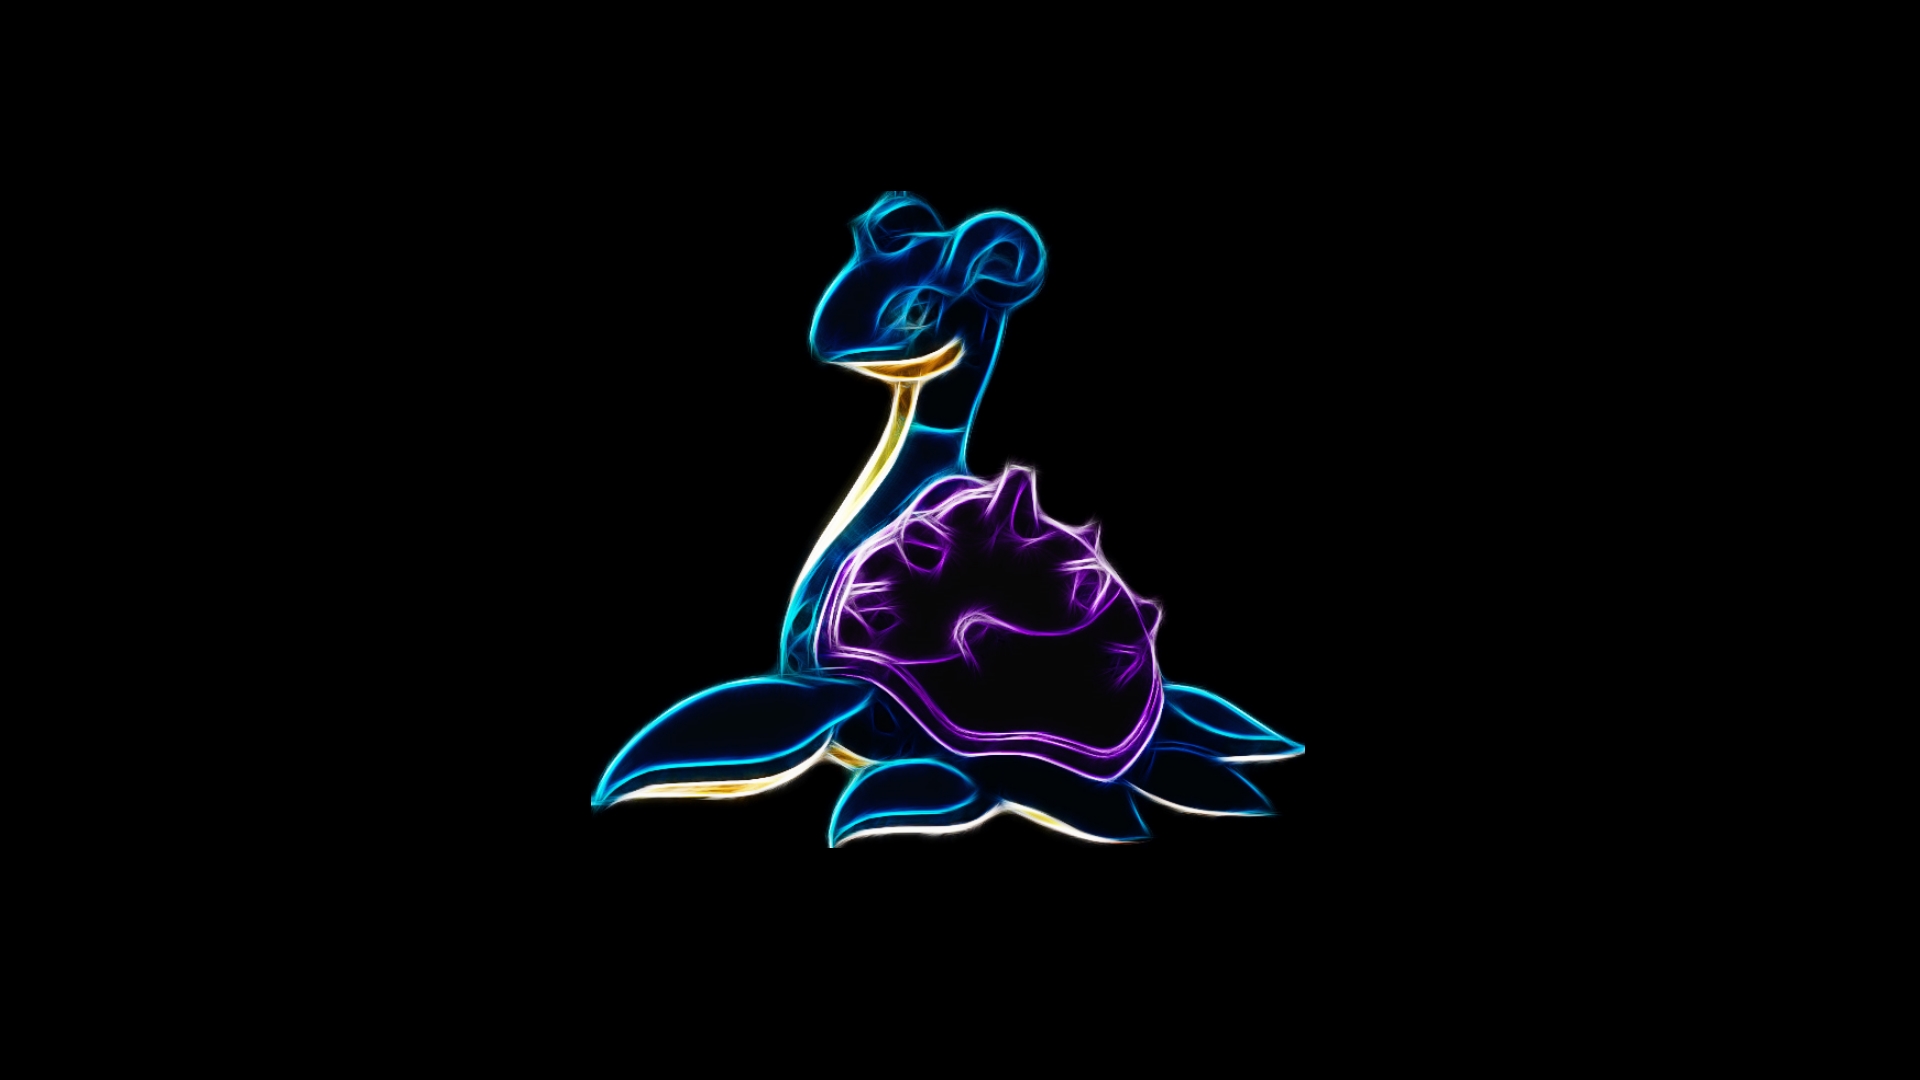 Lapras Wallpaper HD Full Pictures For